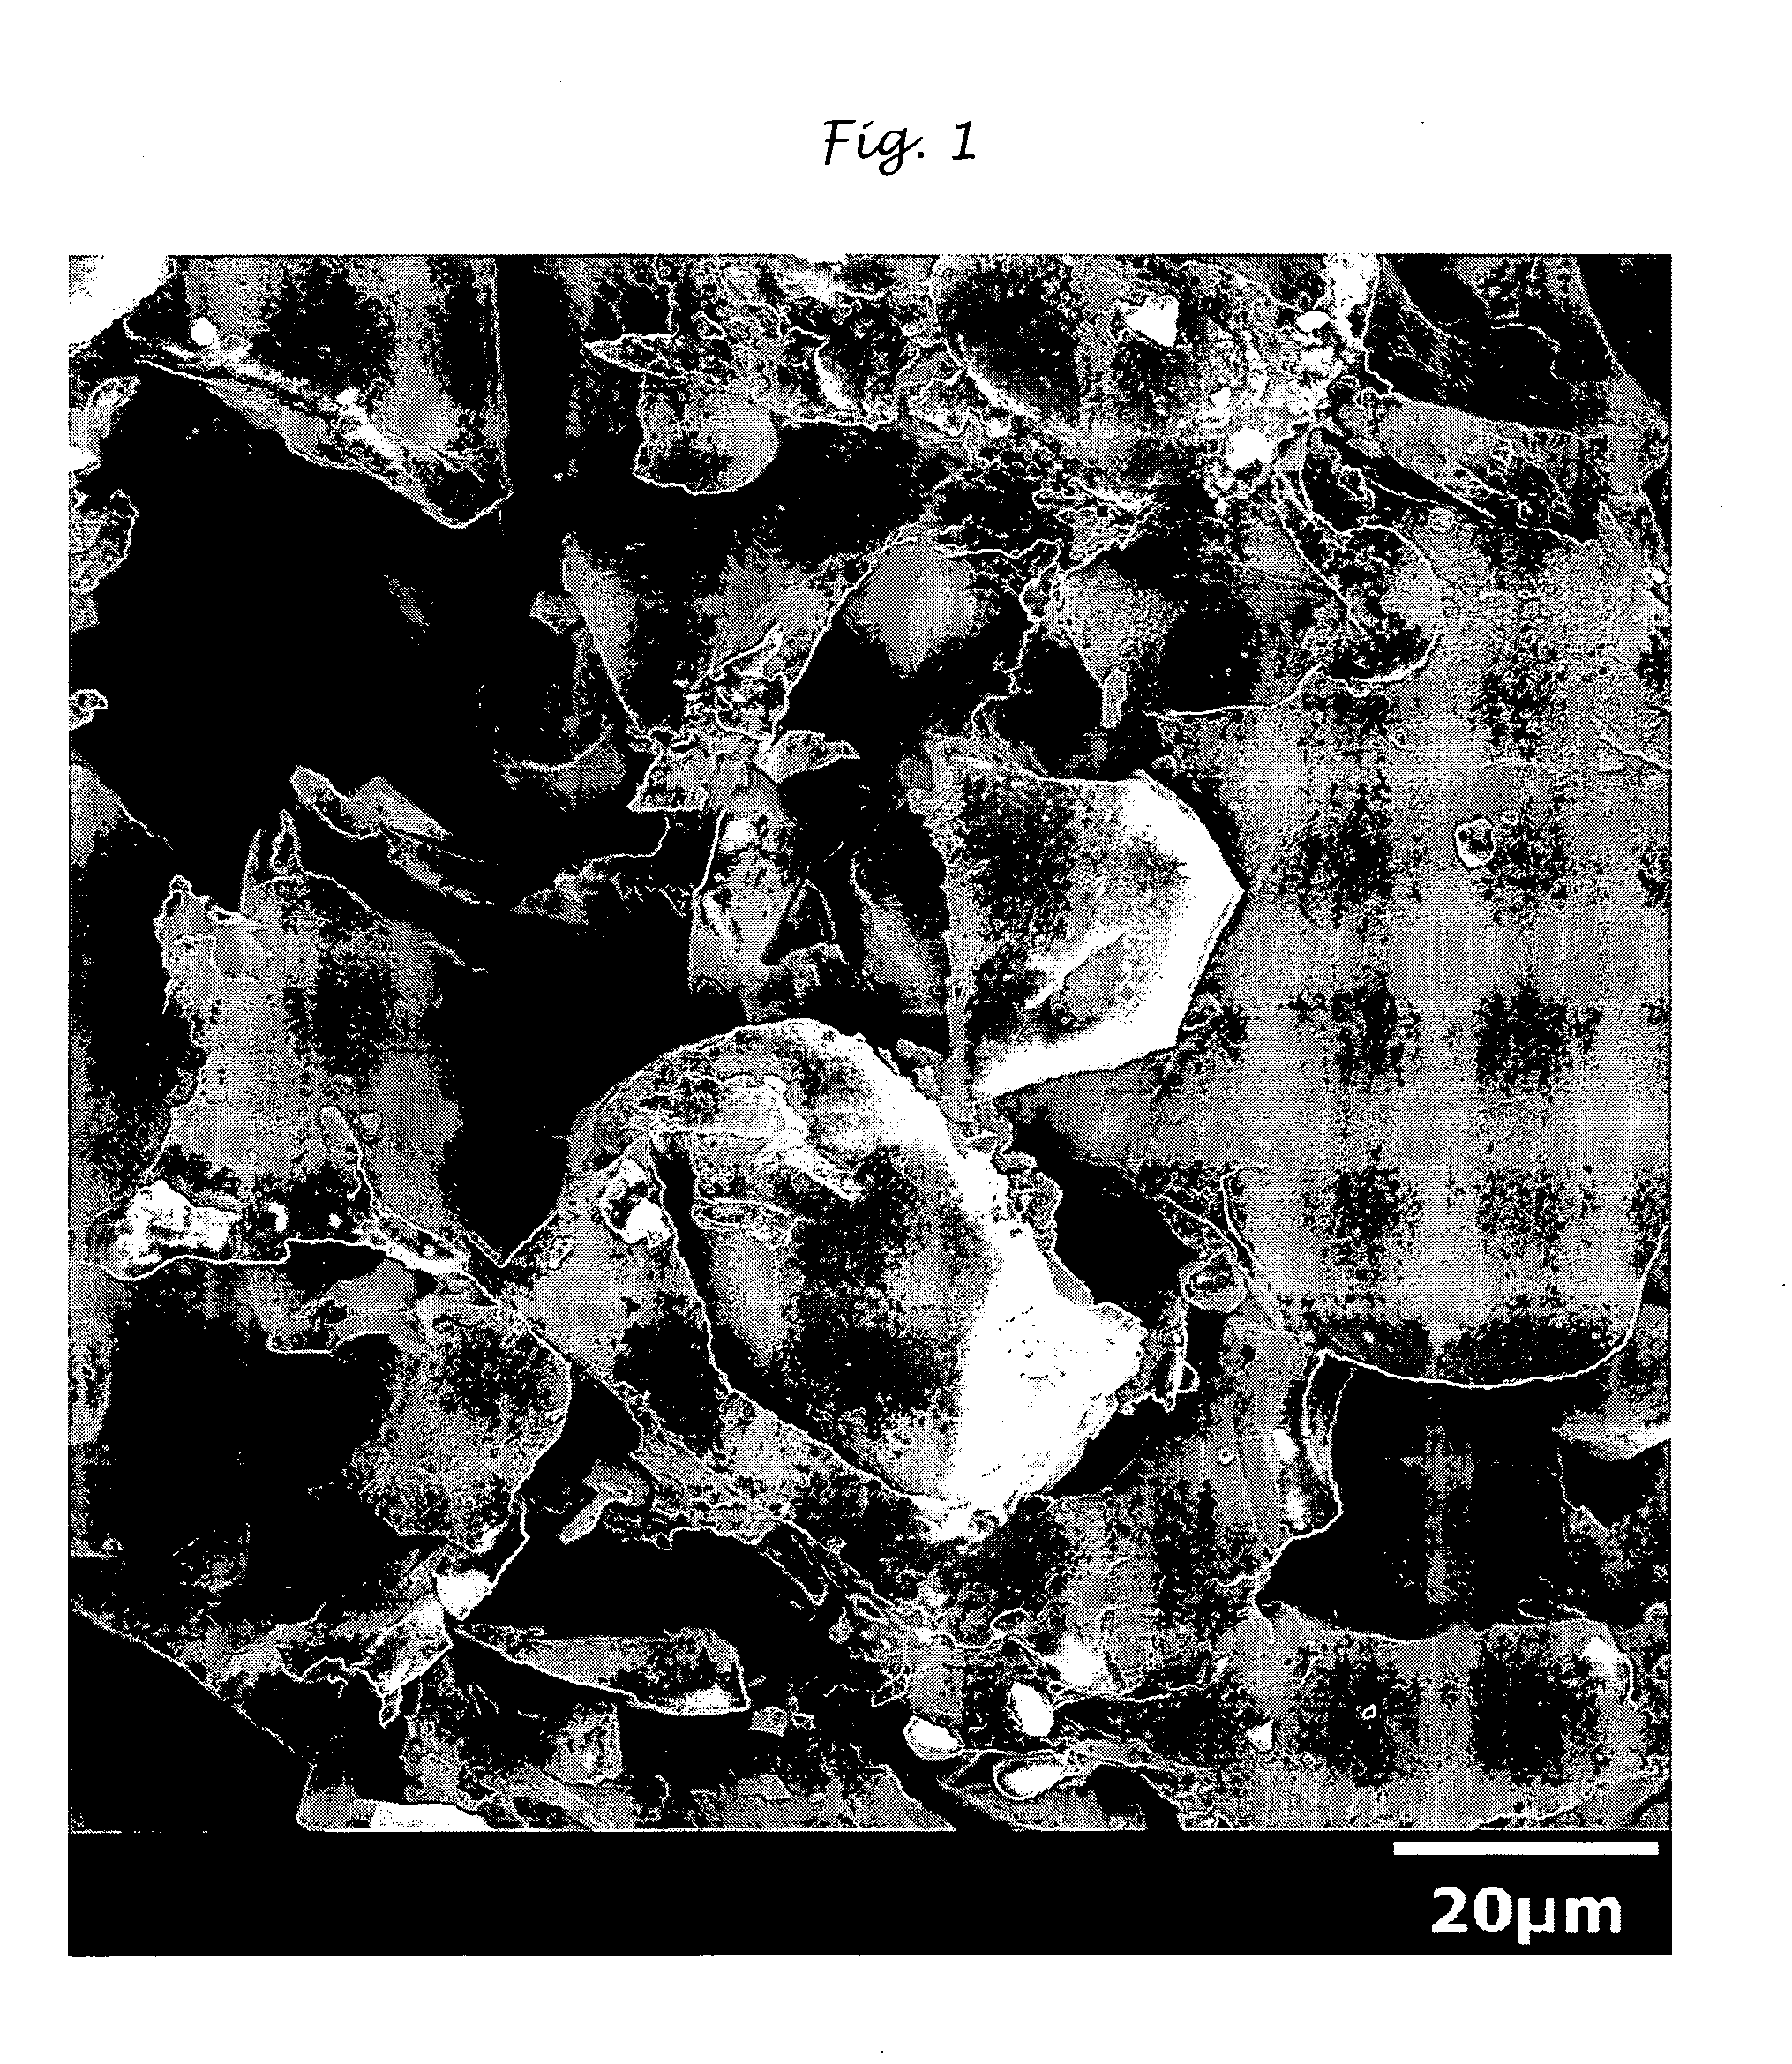 Polyurethane compositions with glass filler and method of making same